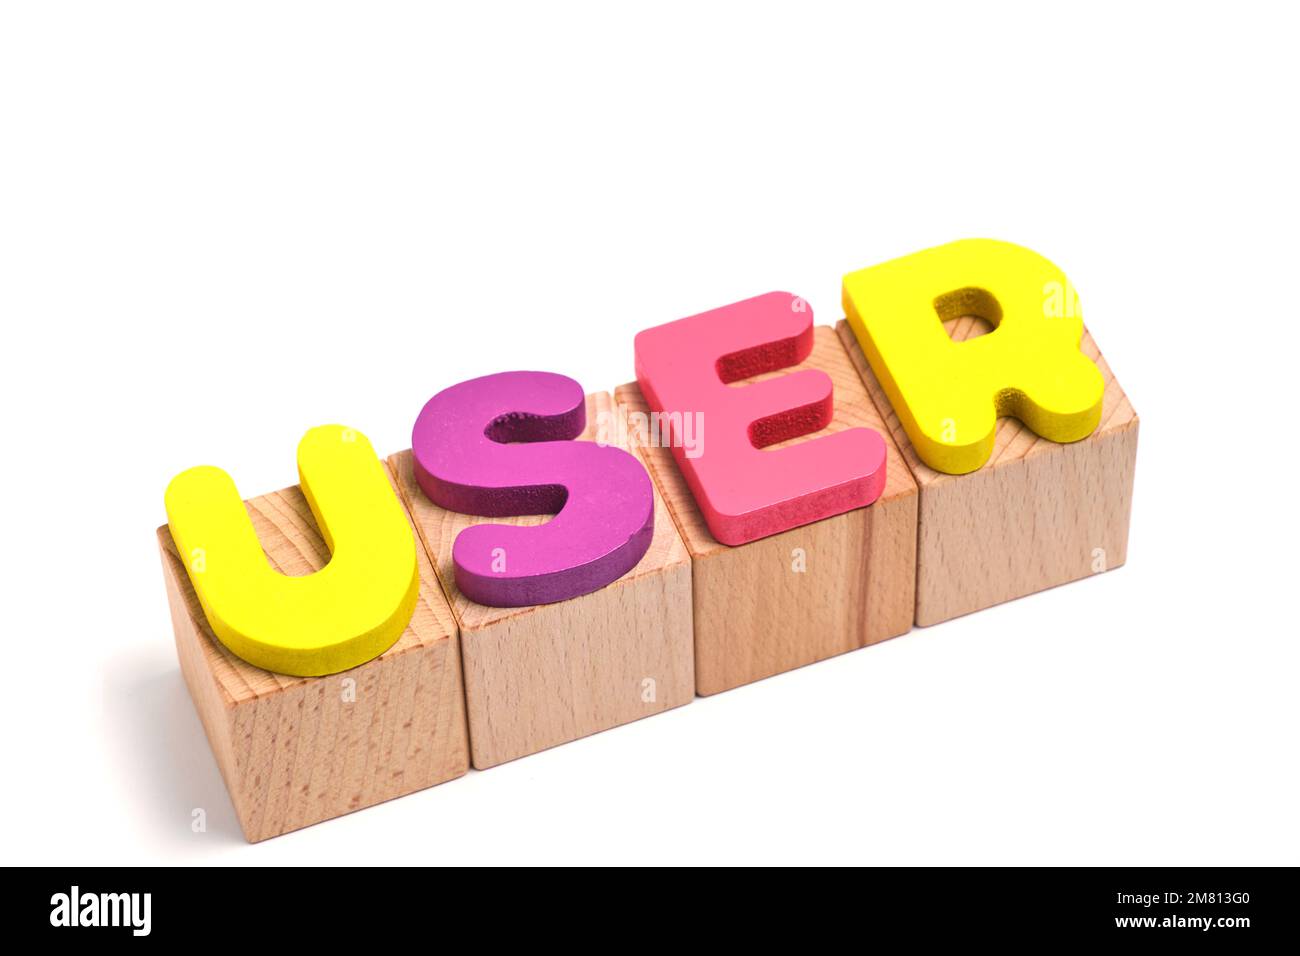 Word user is laid out on wooden cubes and on a white background Stock Photo